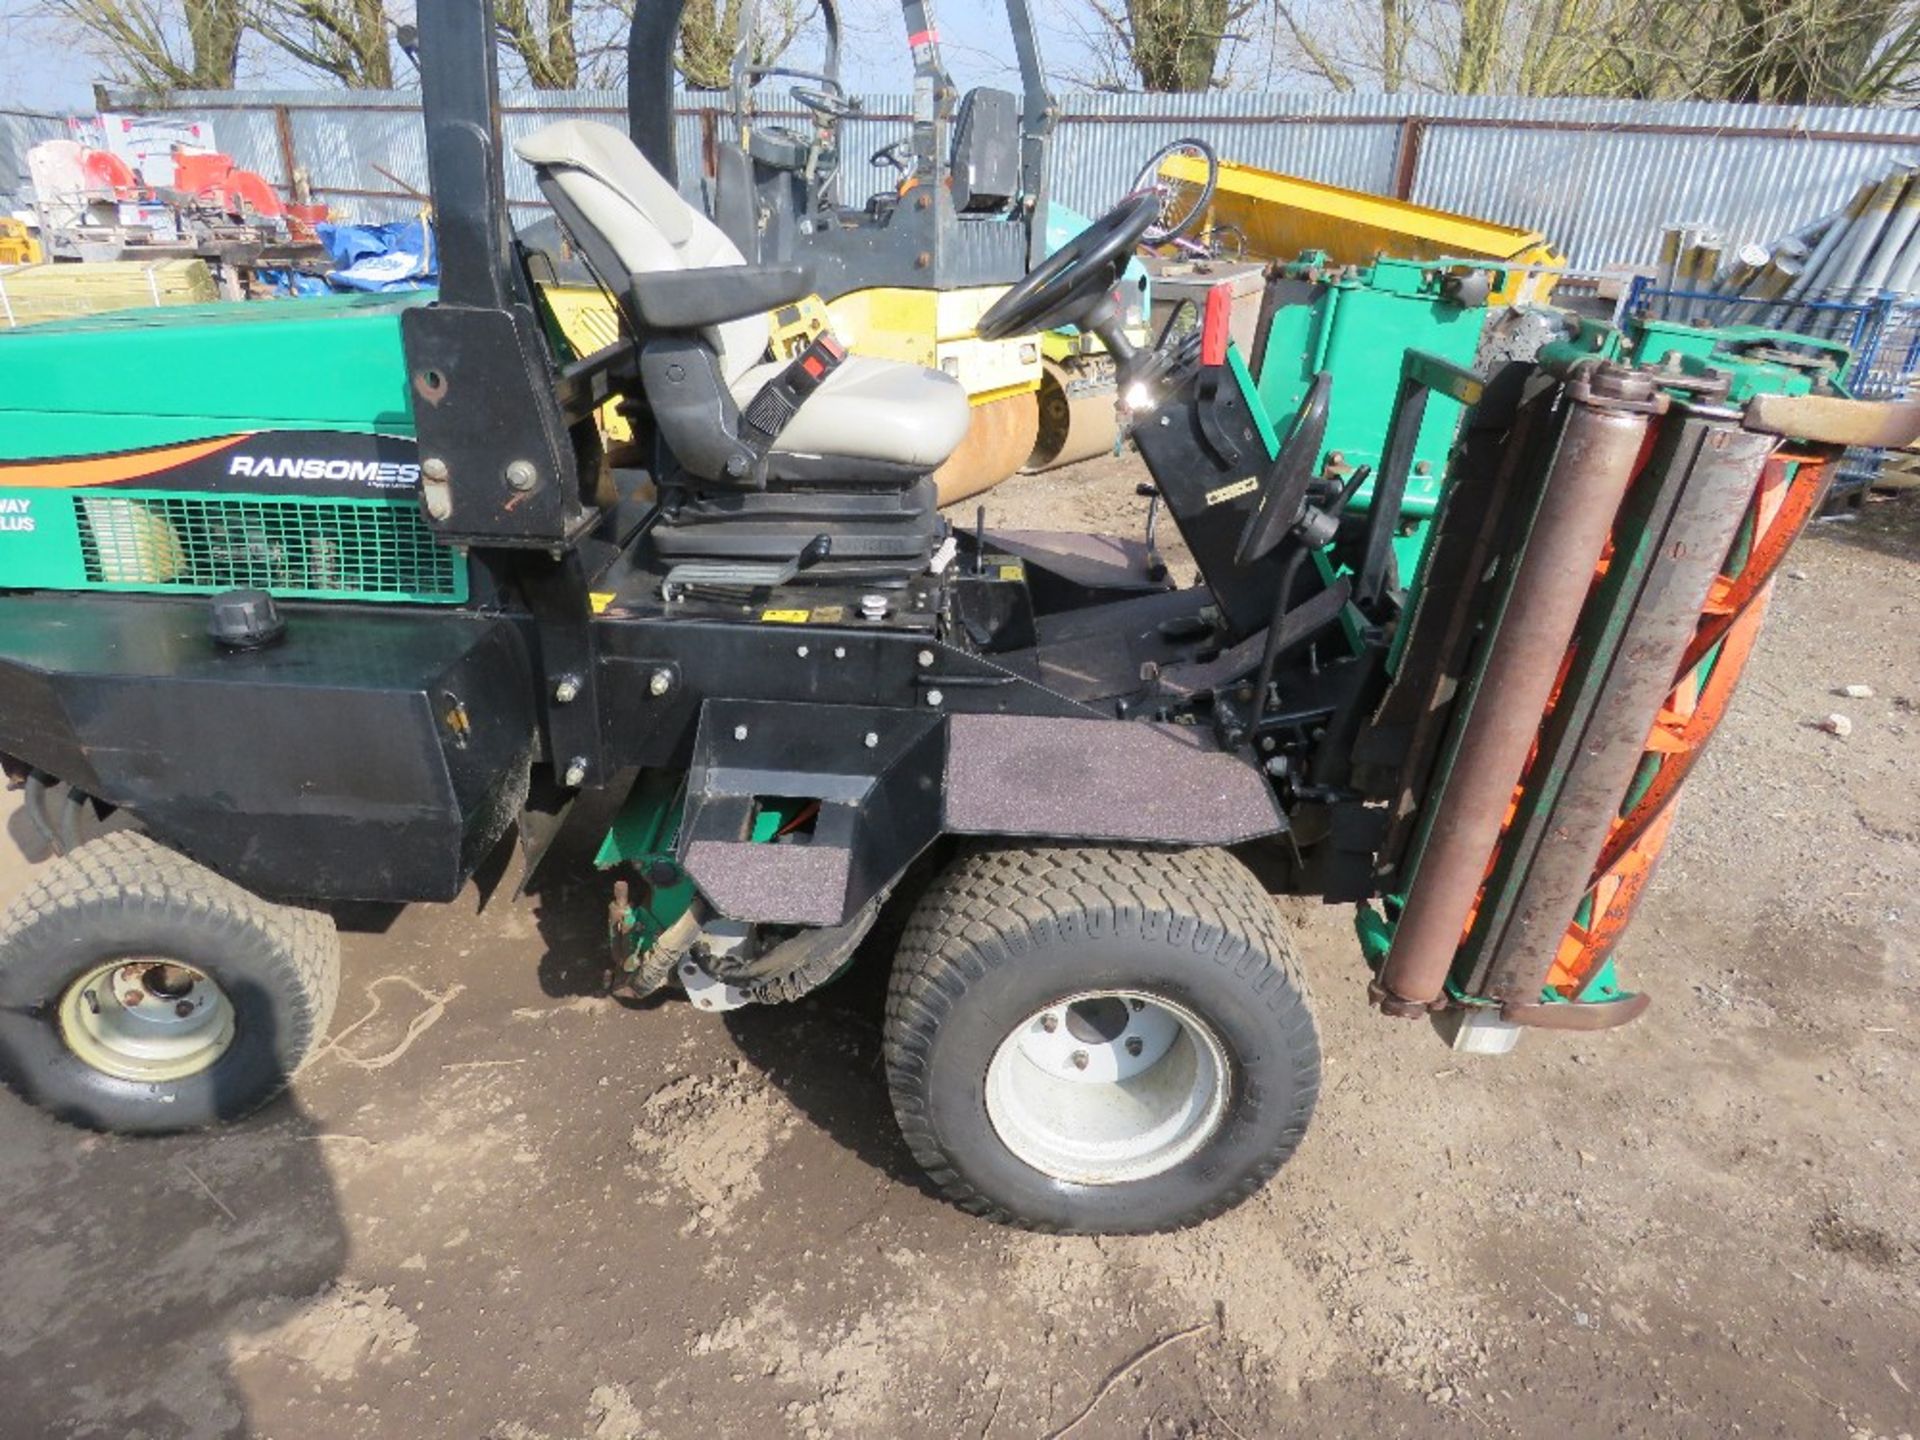 RANSOMES PARKWAY 2250 PLUS PROFESSIONAL TRIPLE RIDE ON MOWER, 4WD, 3300 REC HOURS. DIRECT FROM GOLF - Image 2 of 11